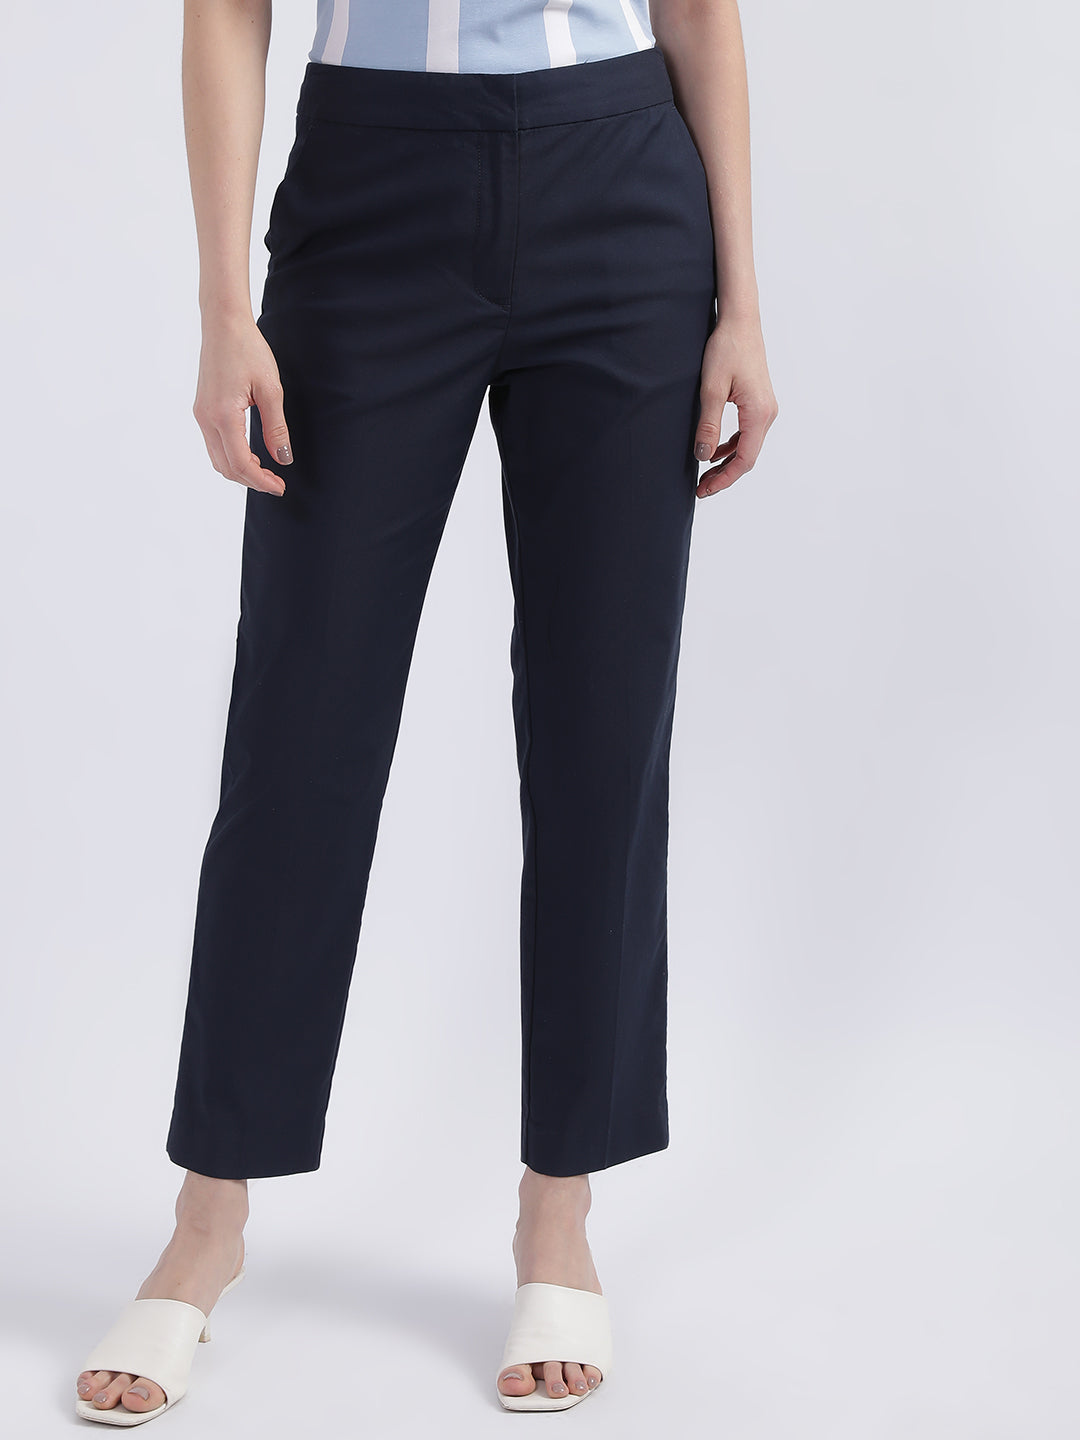 Gant Women Slim Fit Comfort Mid-Rise Cropped Trousers